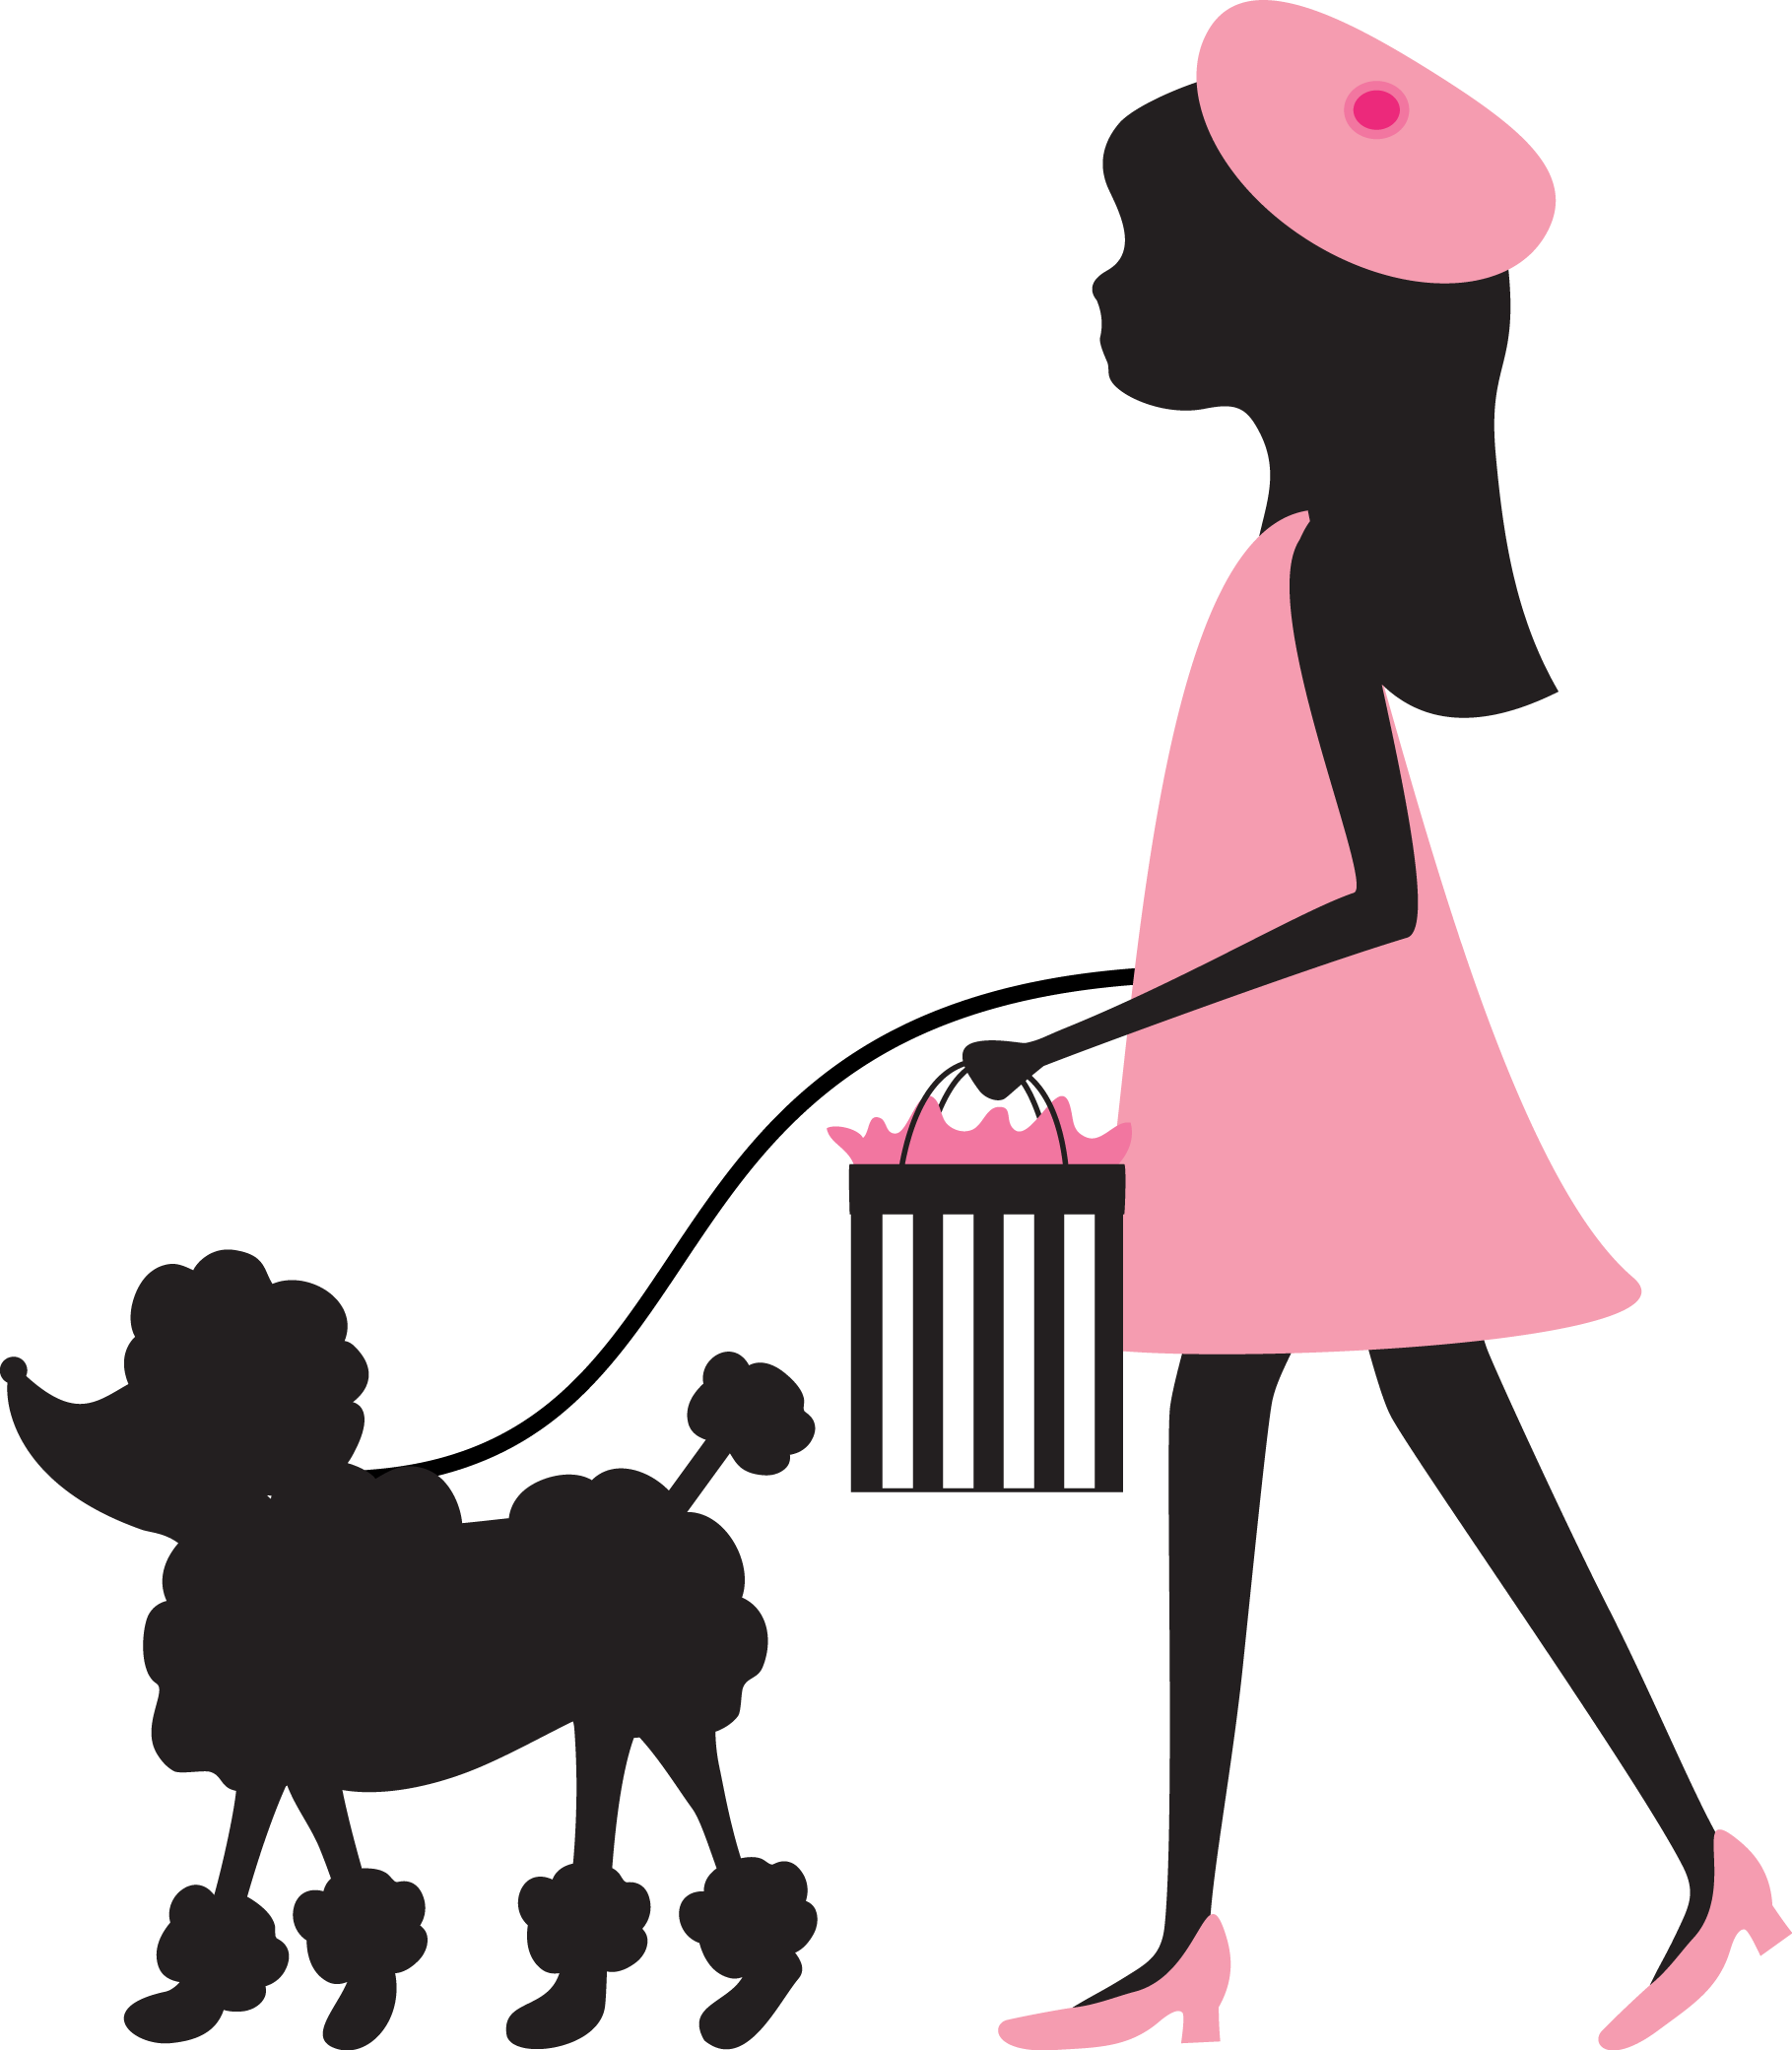 Dogs clipart fashion. Isvj apoczras png pinterest